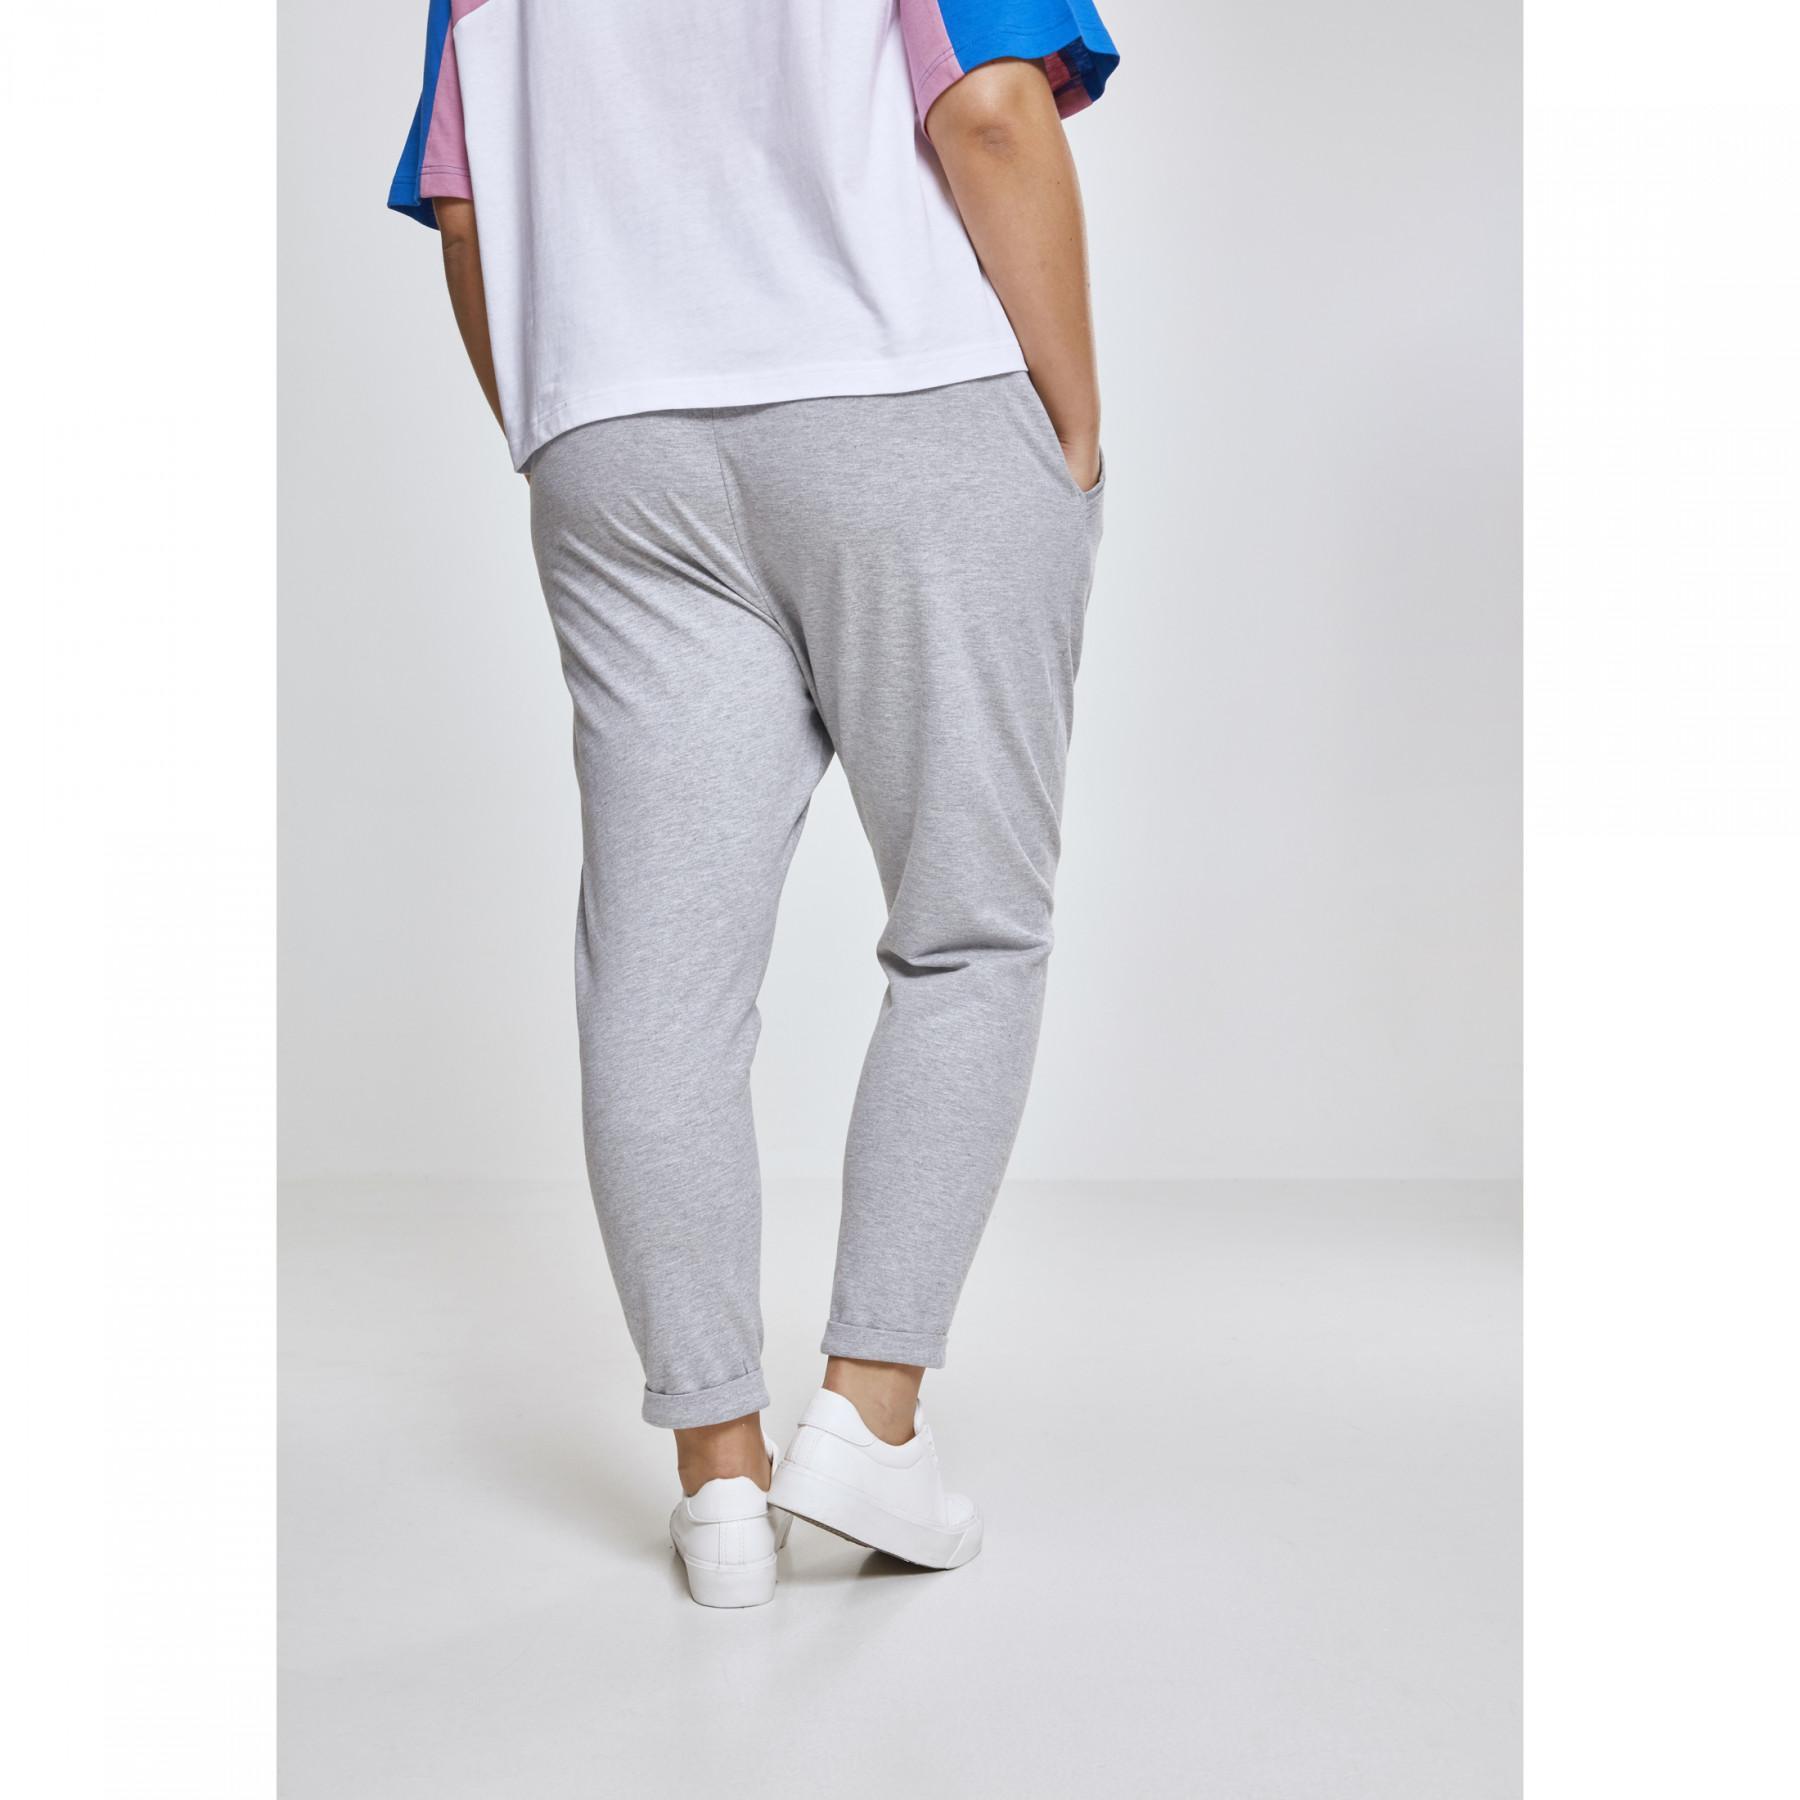 Trousers woman Urban Classic terry